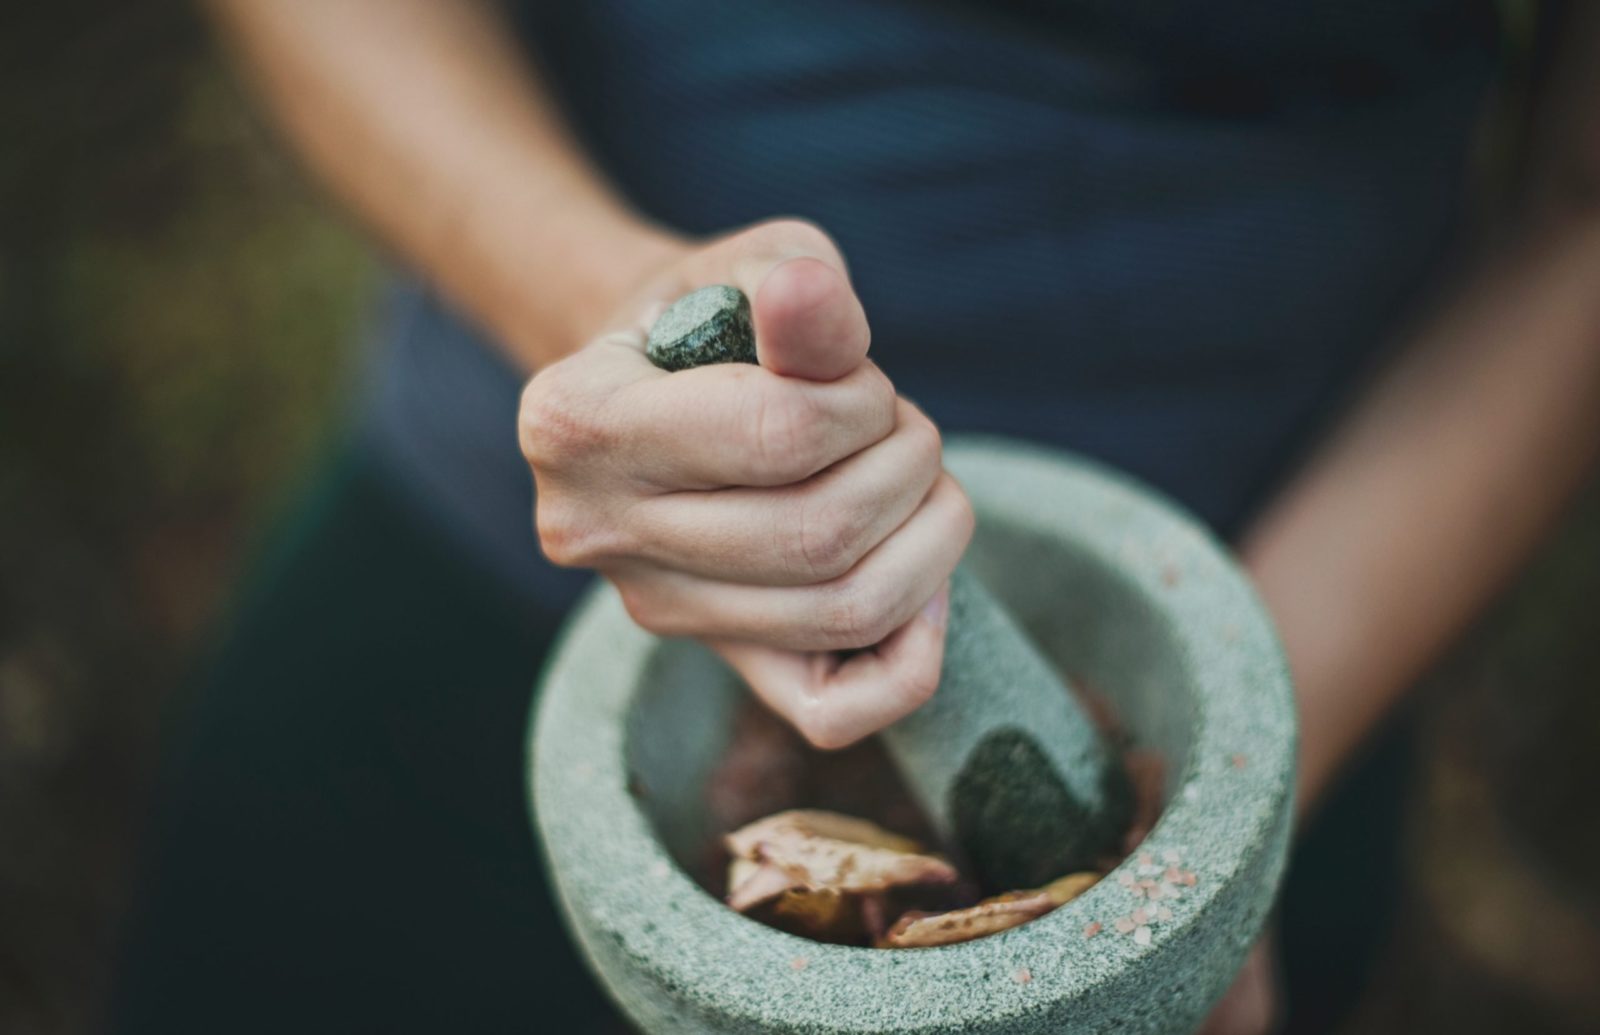 Grinding chinese herbs with mortar and pestle